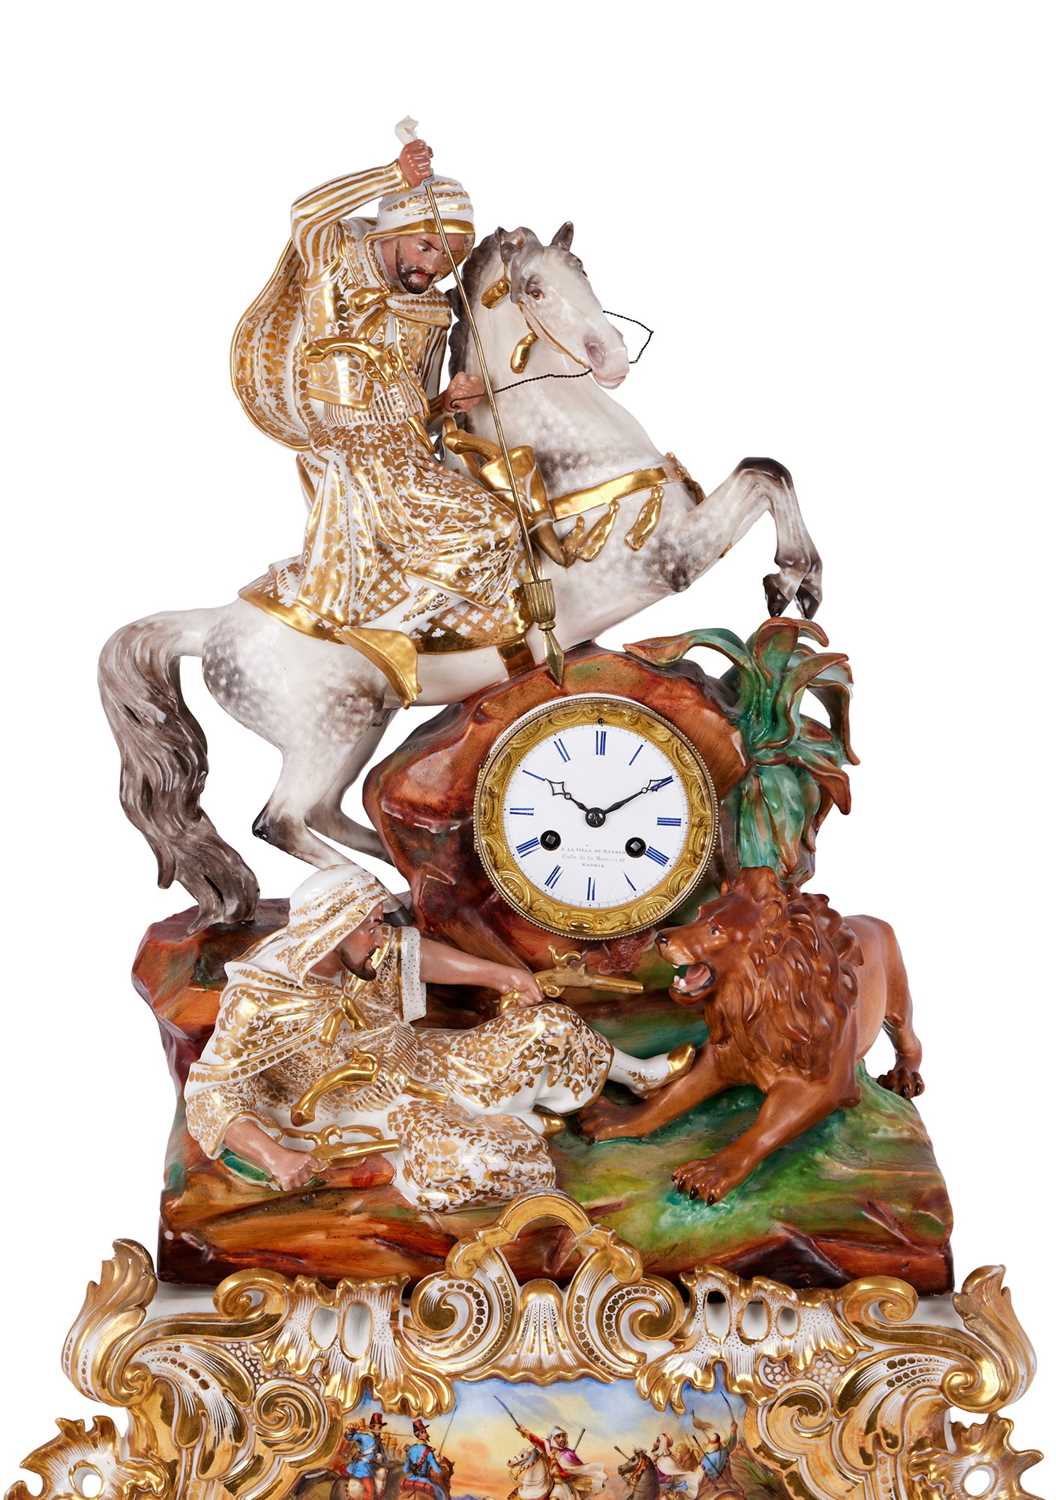 JACOB PETIT: A FINE 1840'S PORCELAIN CLOCK MADE FOR THE OTTOMAN / TURKISH MARKET - Image 6 of 6